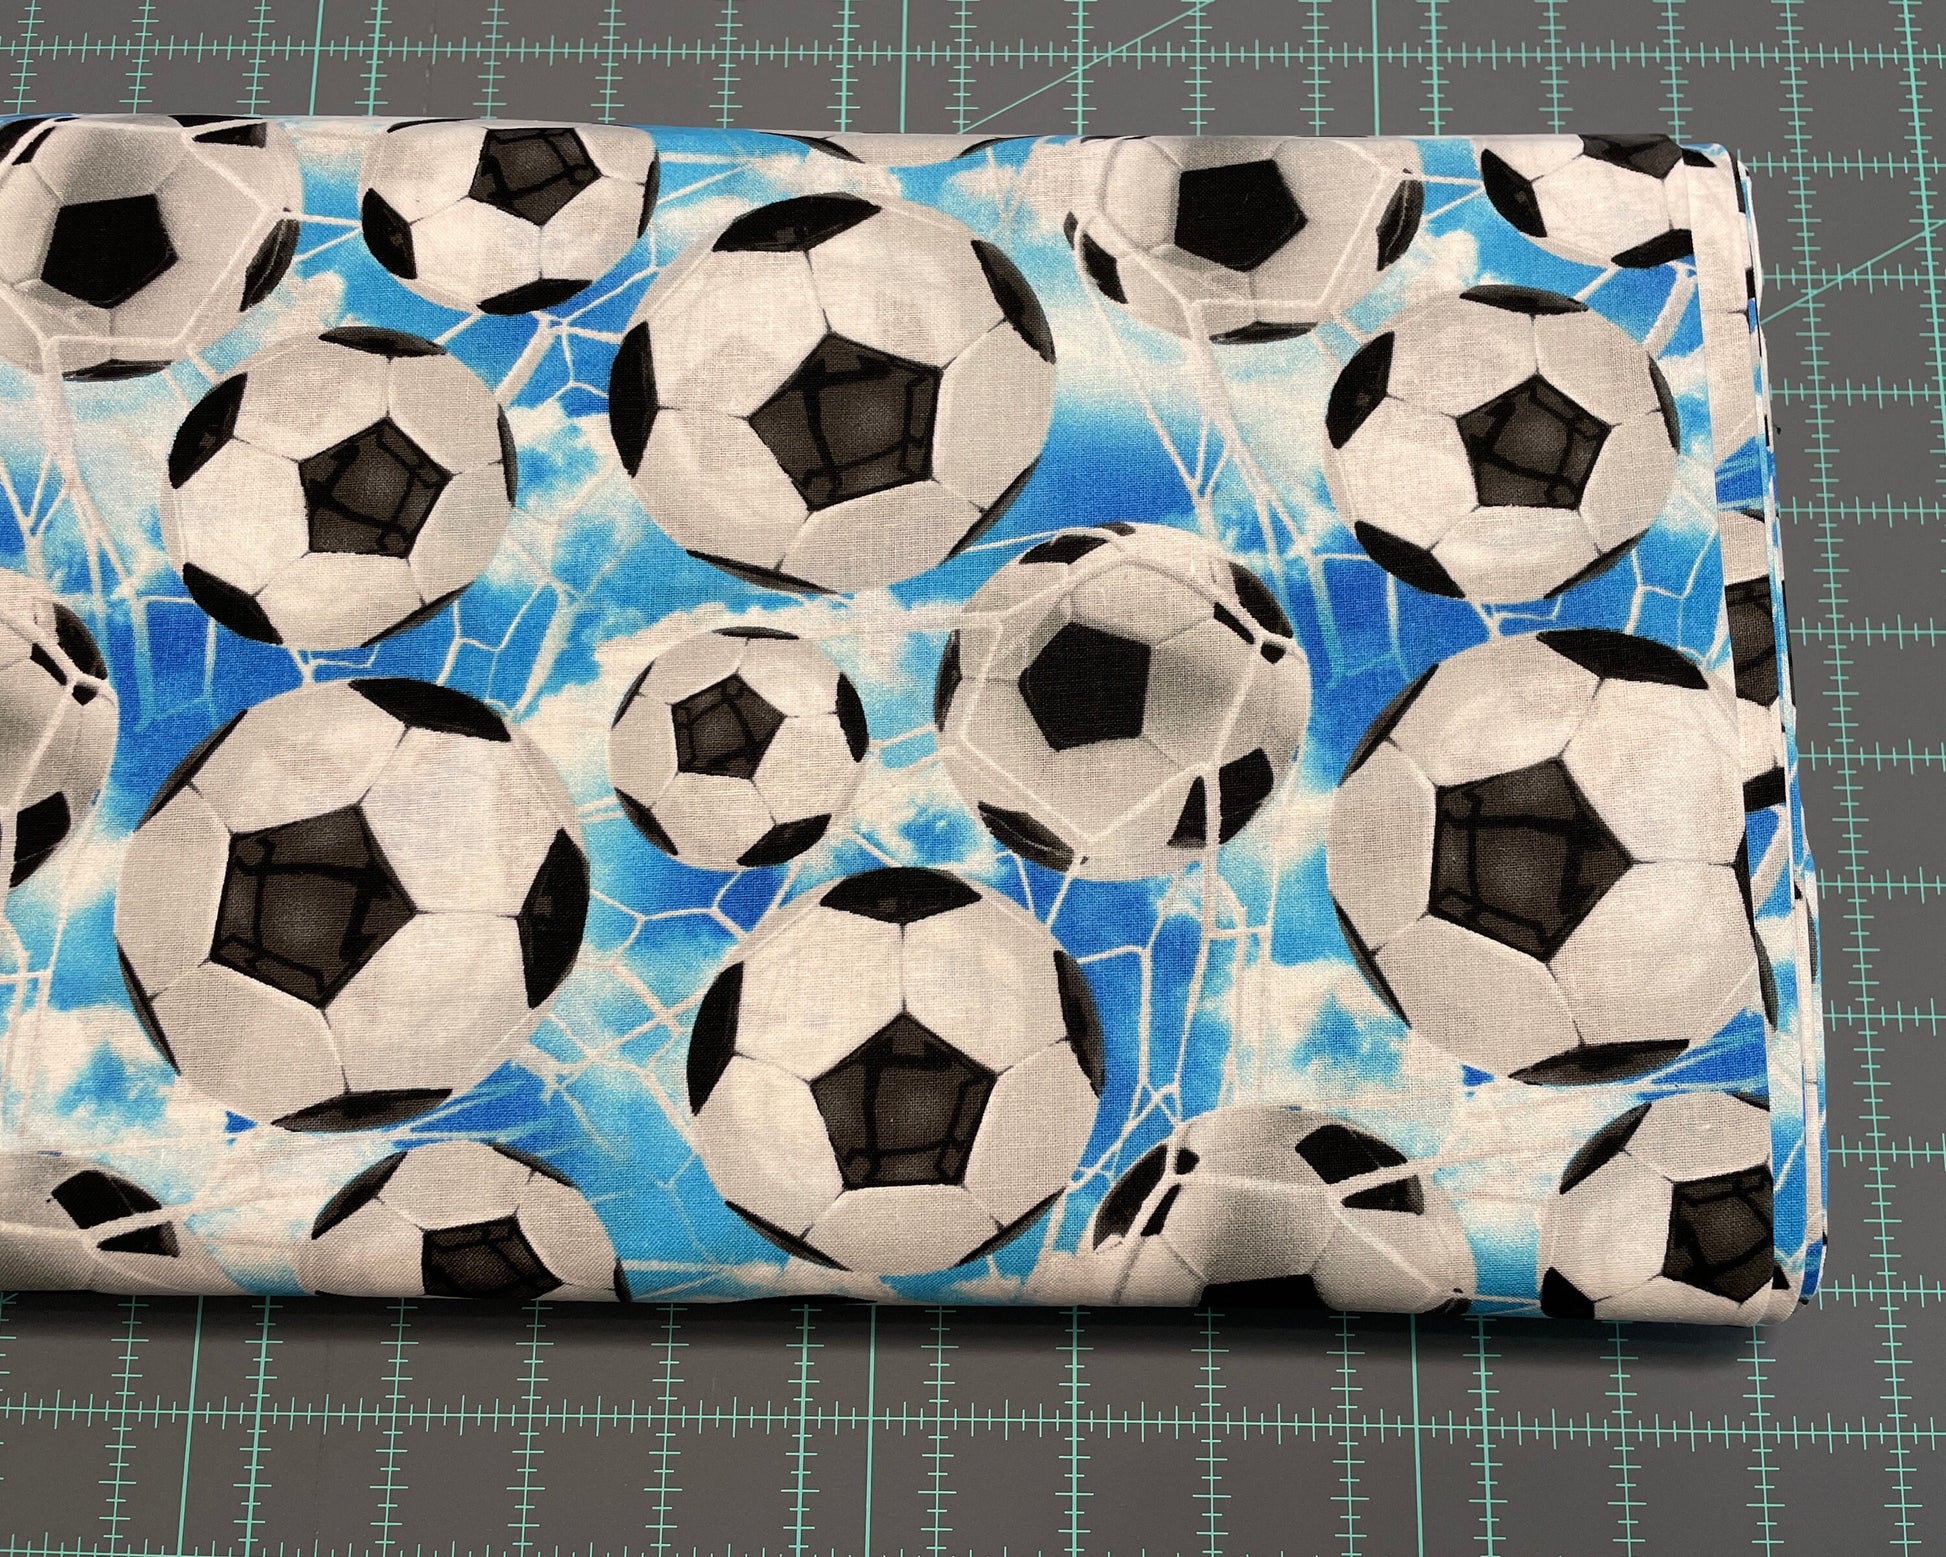 Soccer Fabric - 100% Cotton - Quilting Cotton - Blue Soccer Sky with Net - Sports Fabric - Black and White Soccer ball - Ships NEXT DAY